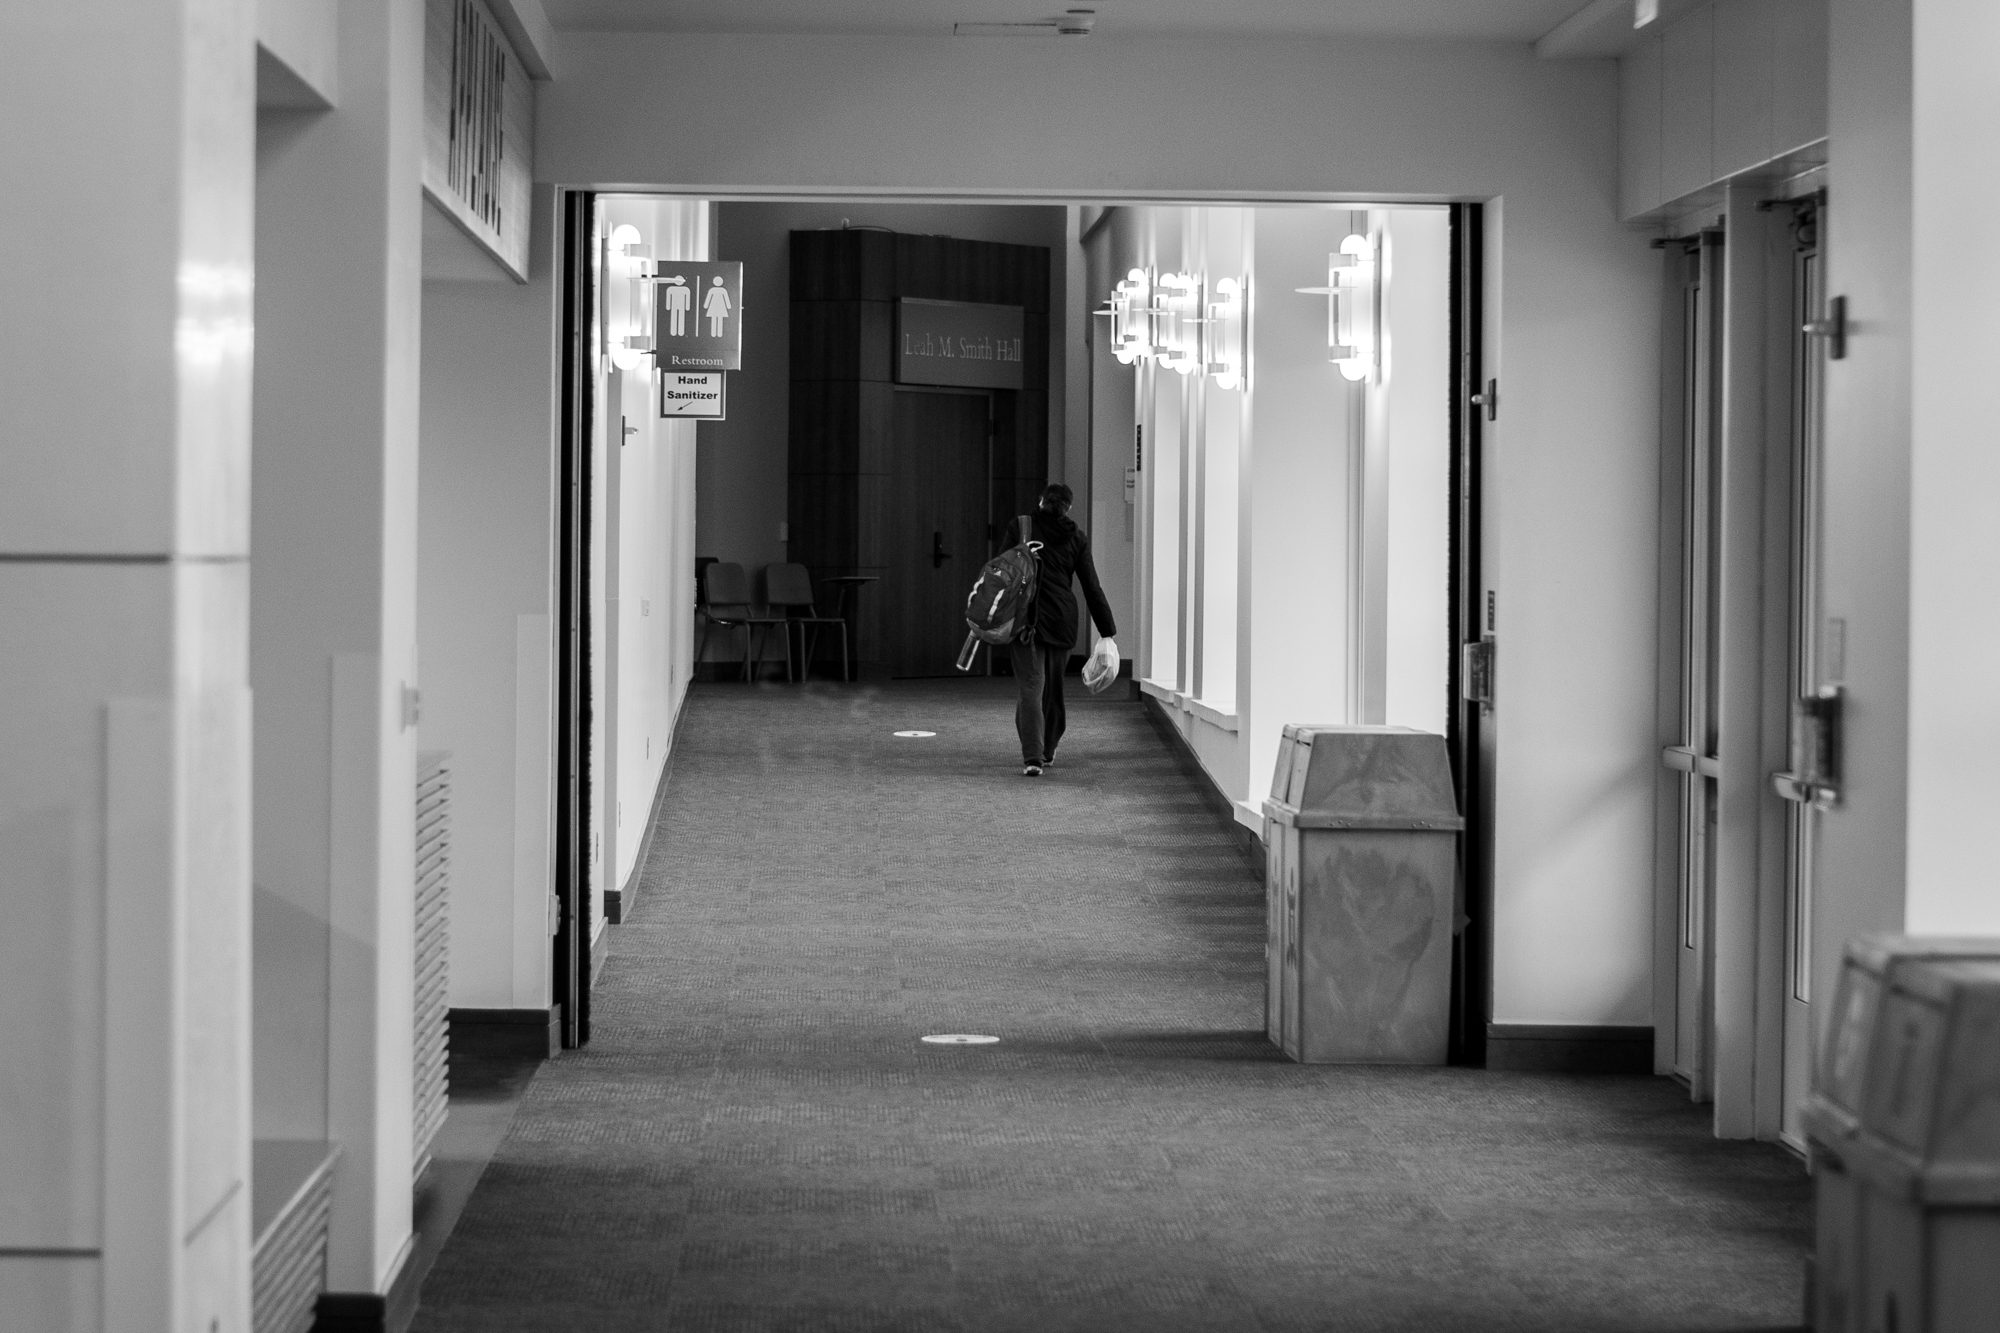 A person walks through an otherwise empty hallway